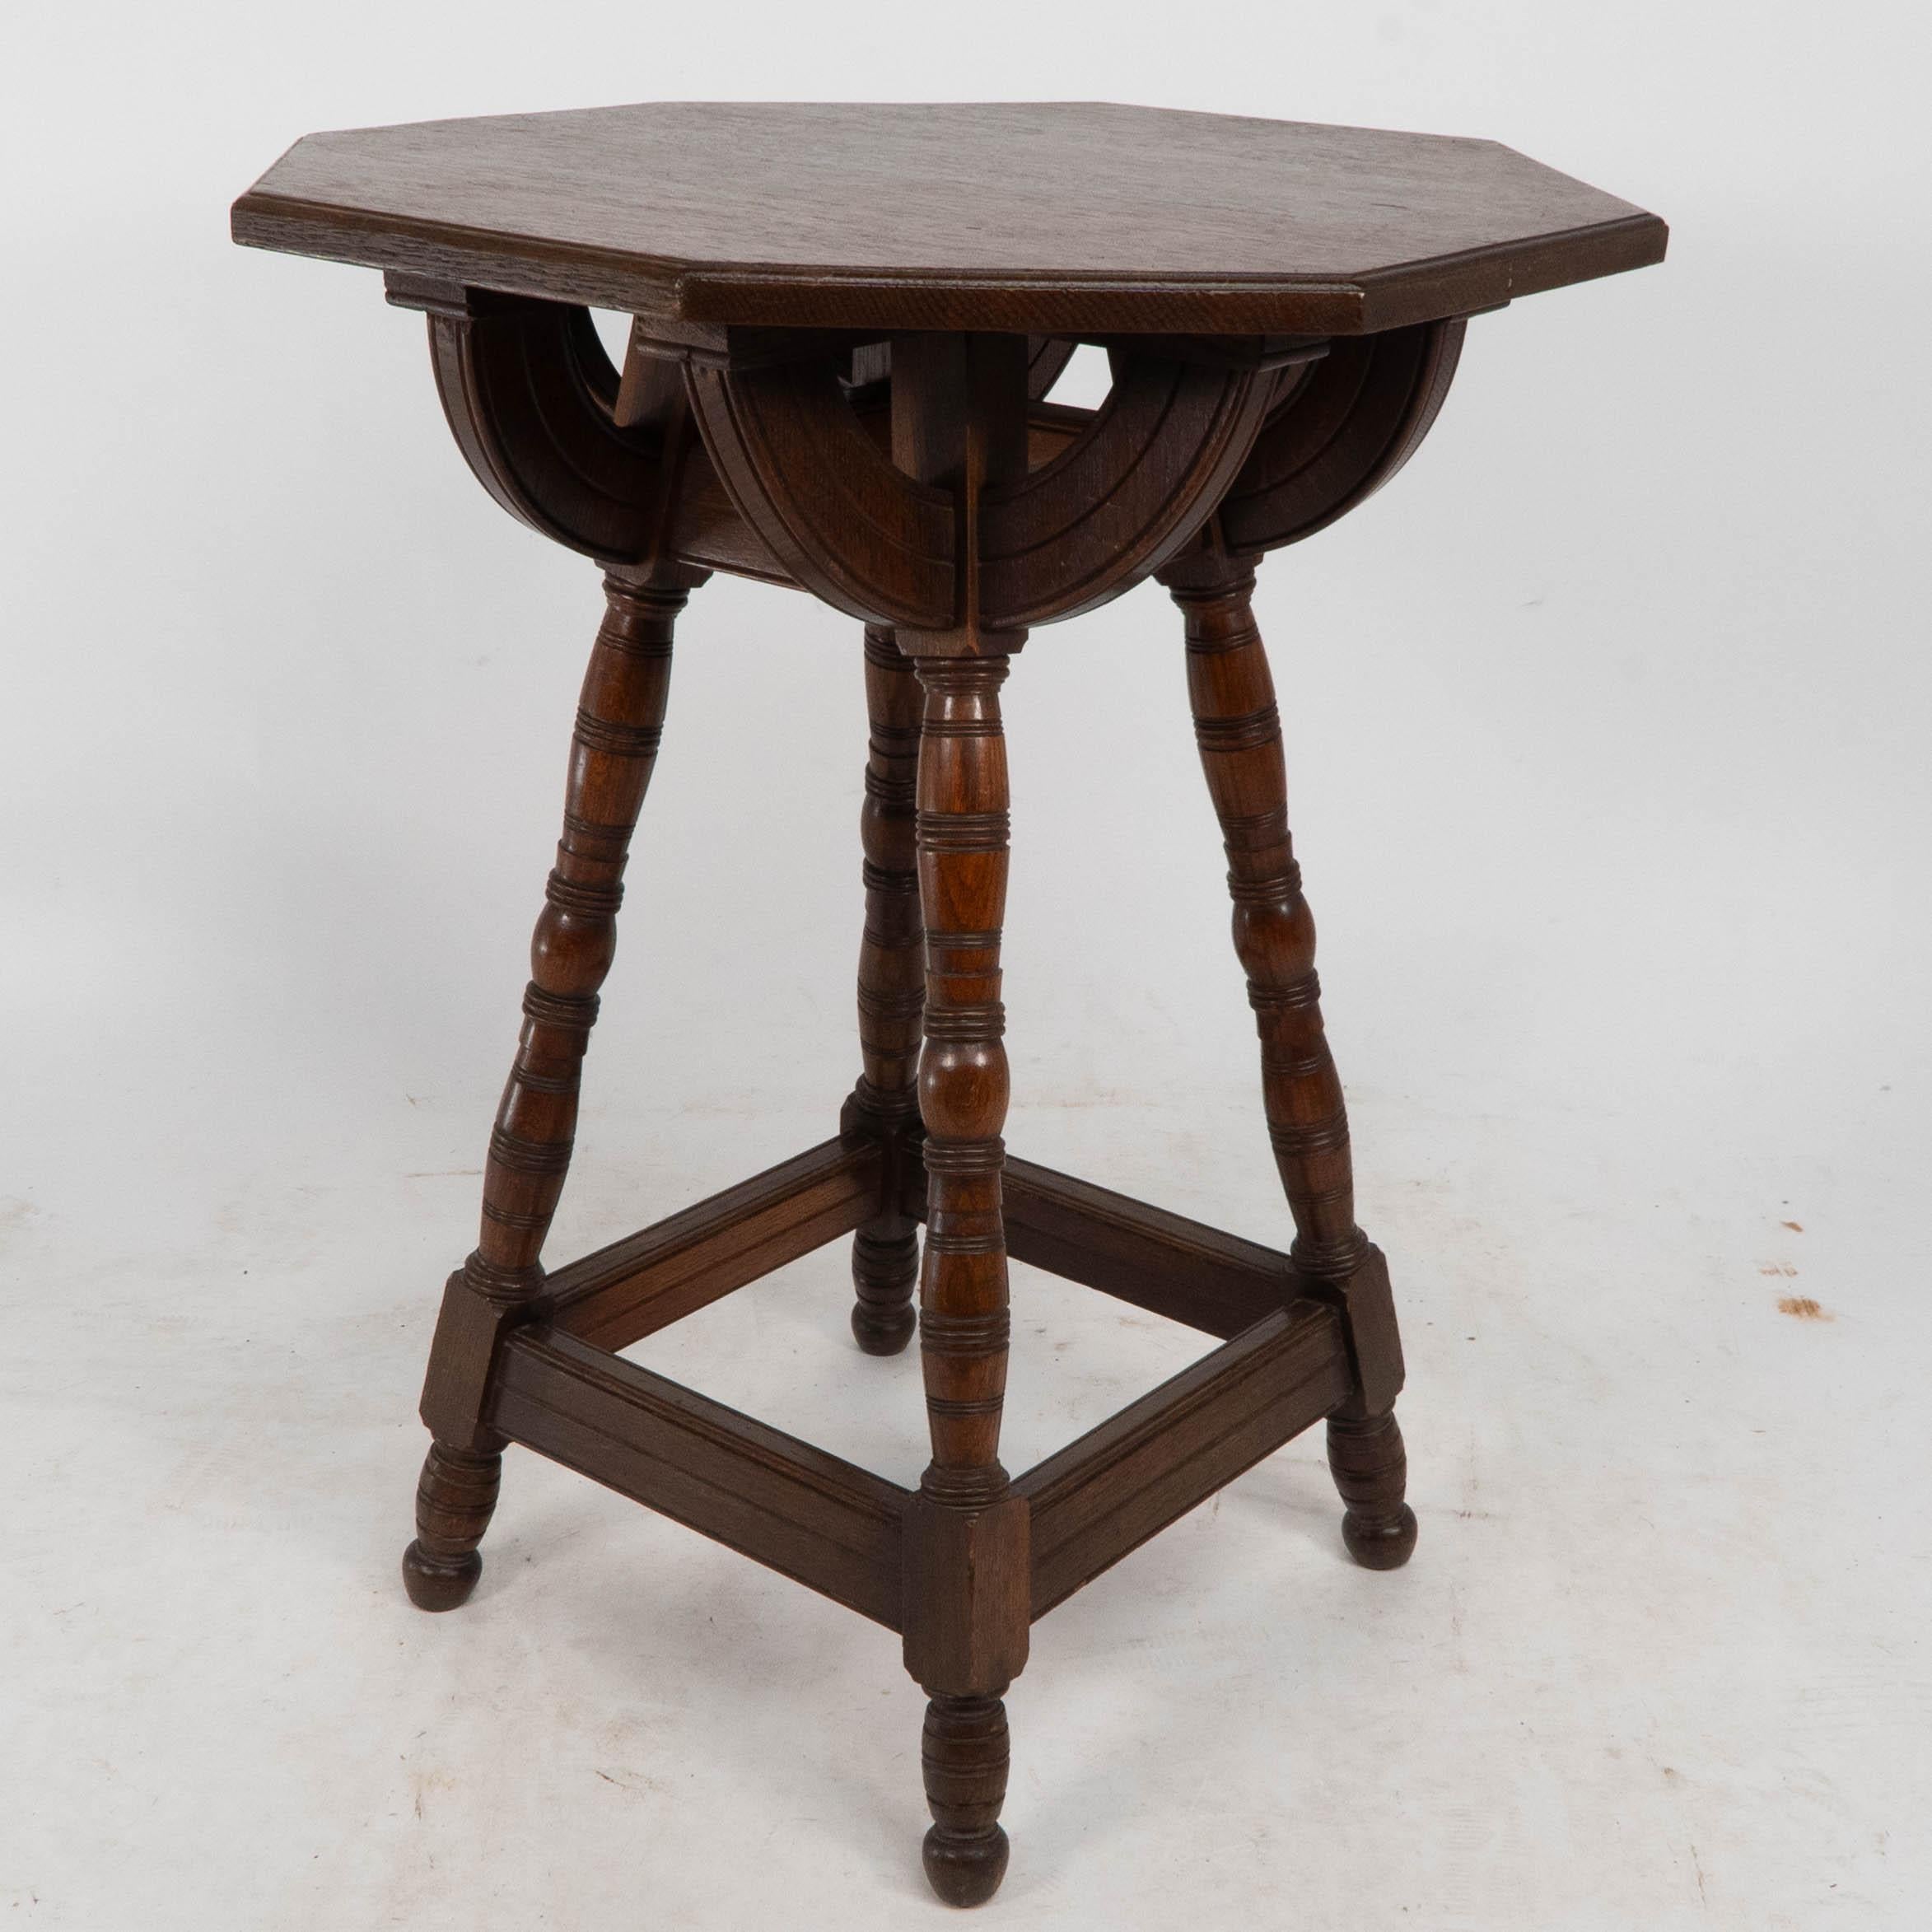 English Collier and Plucknett. A rare Gothic Revival oak side table For Sale